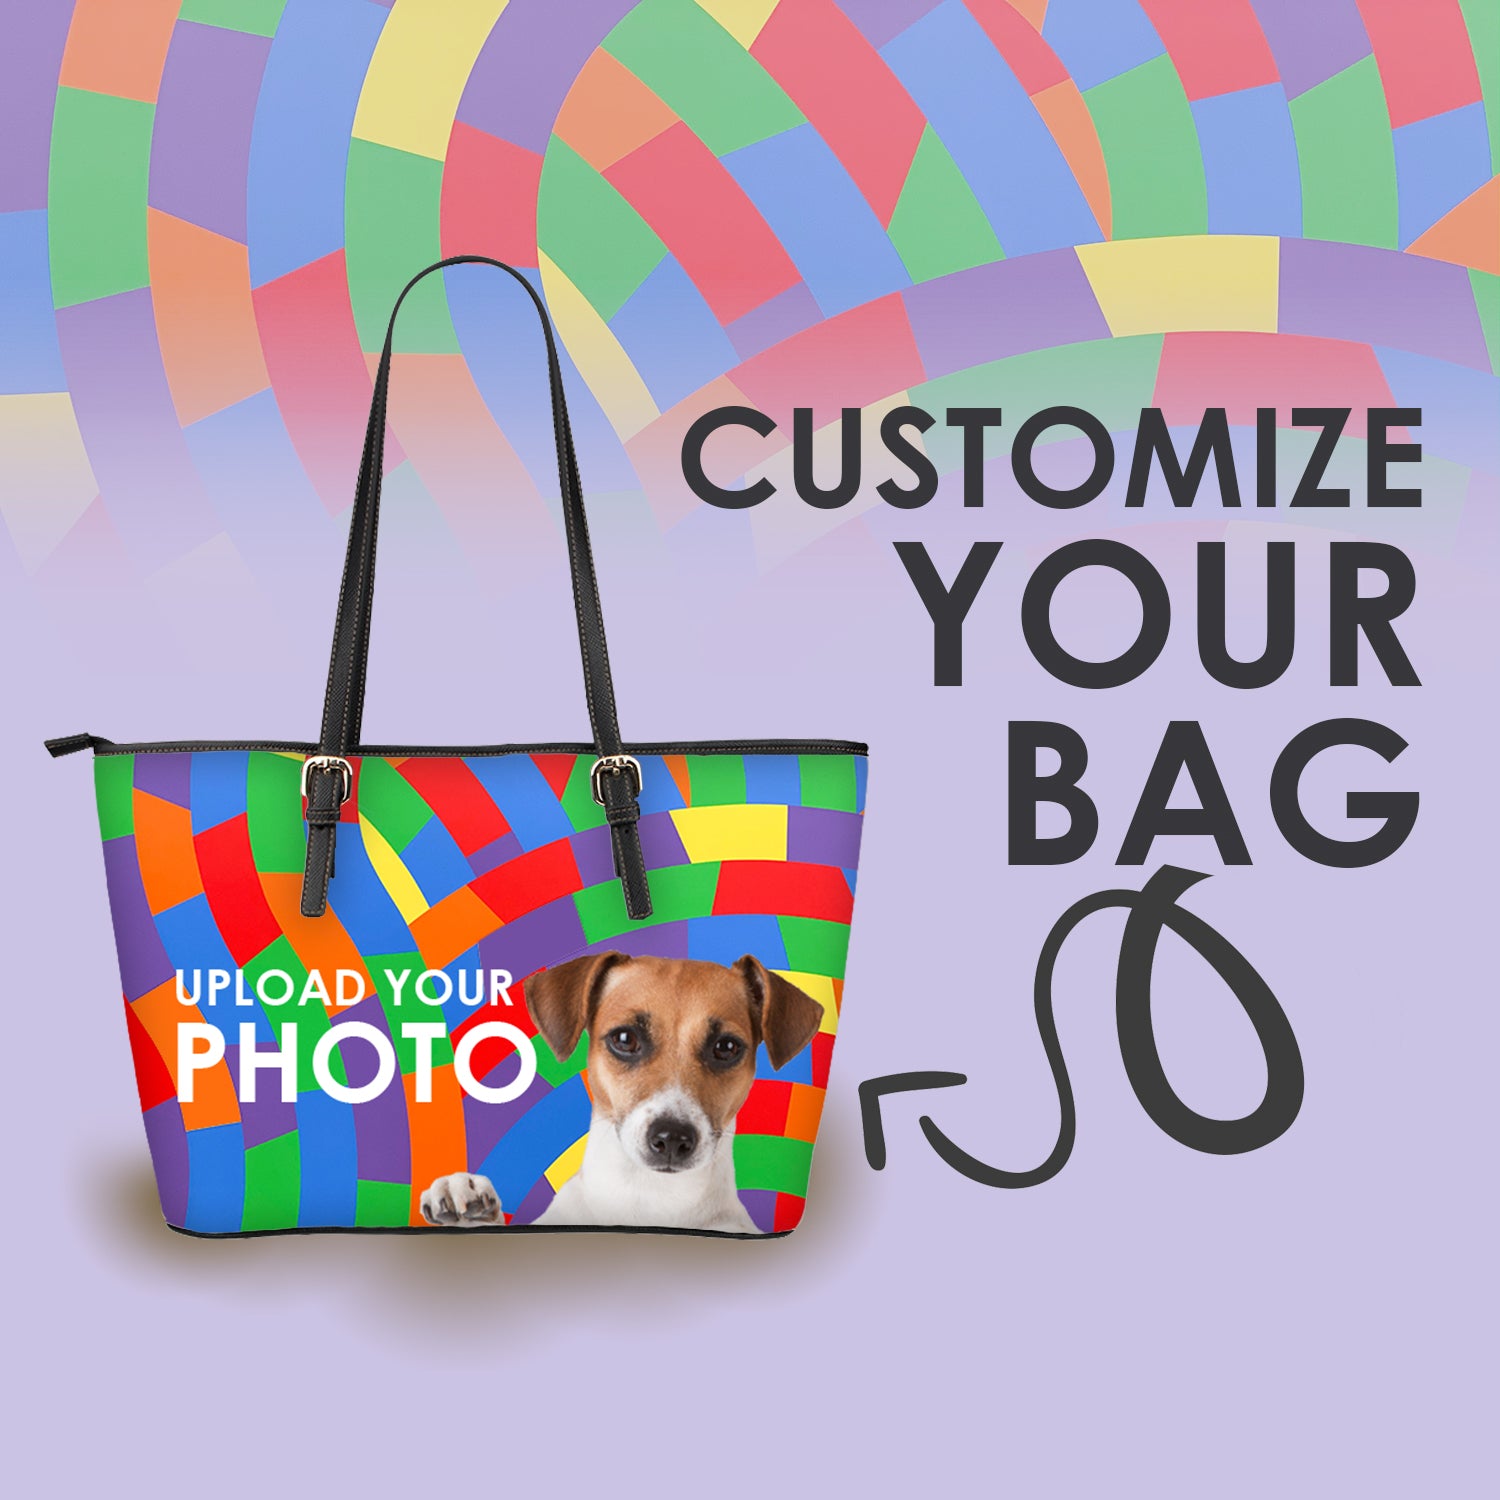 Personalized Tote Bag - 2 Different Photos